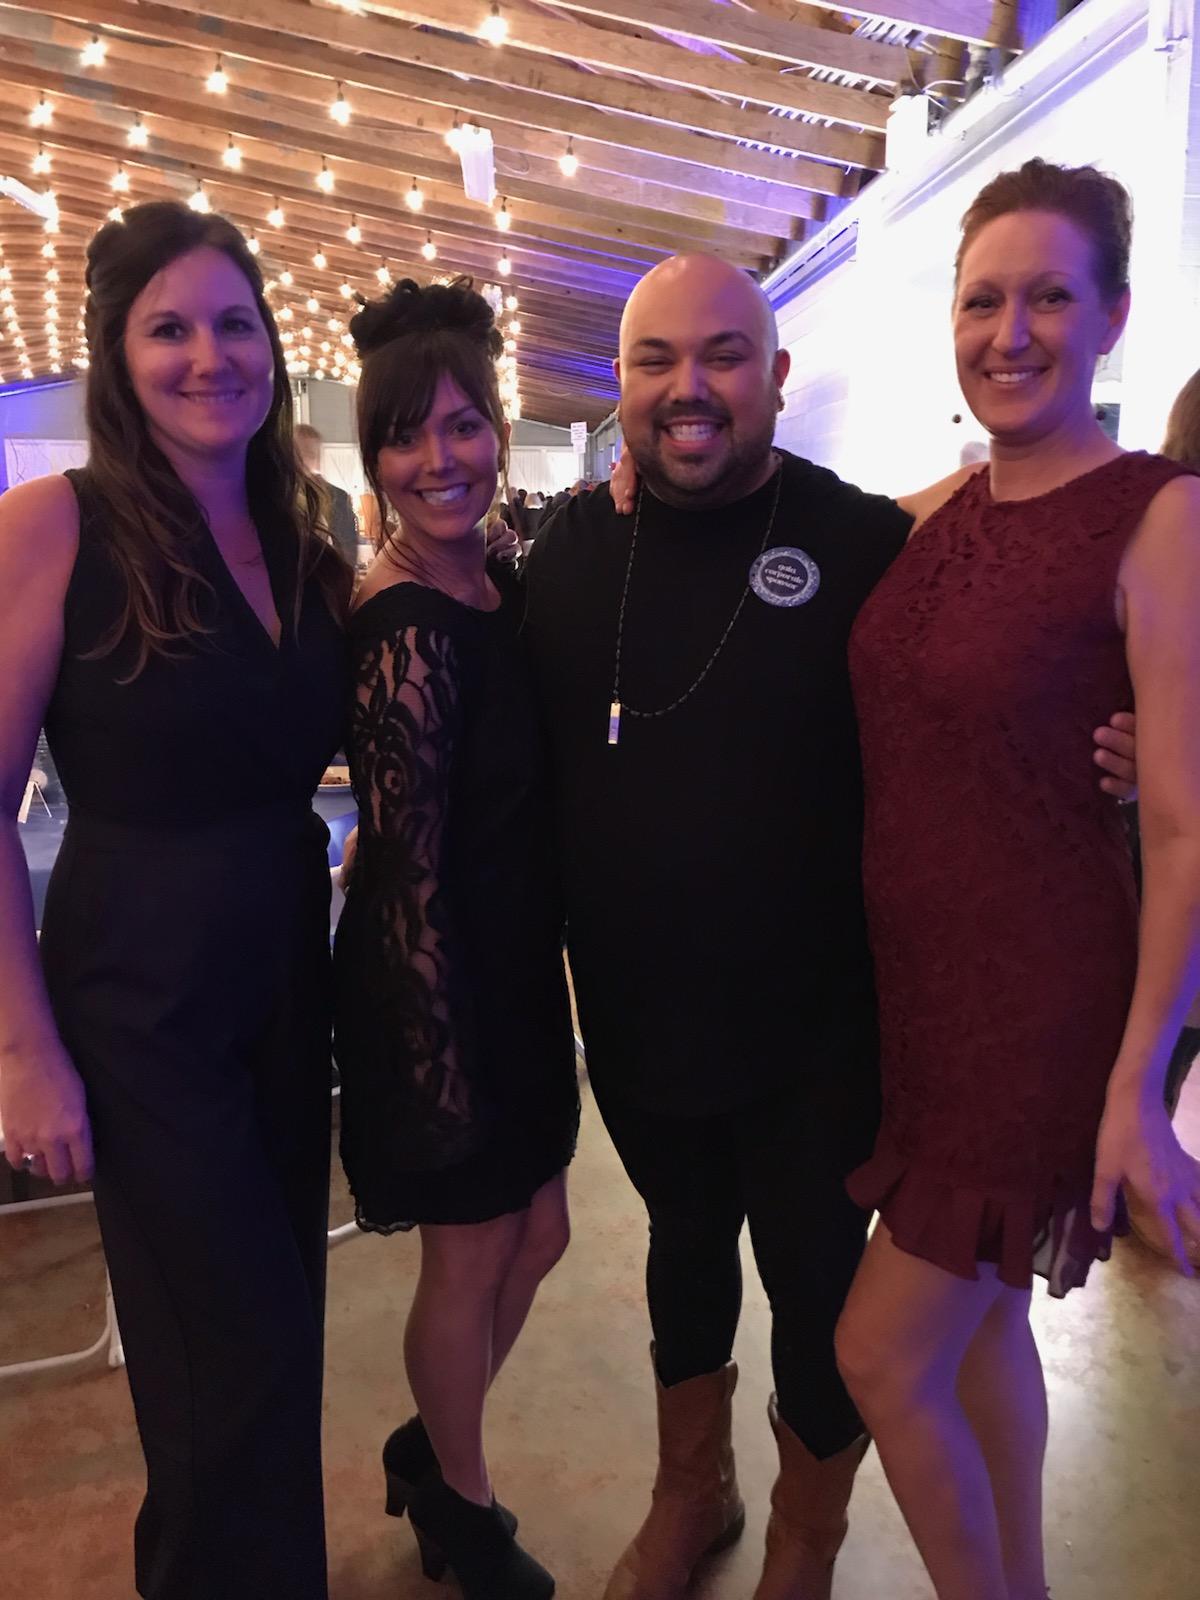 Hairoics staff at Wags and Whiskers Fundraiser